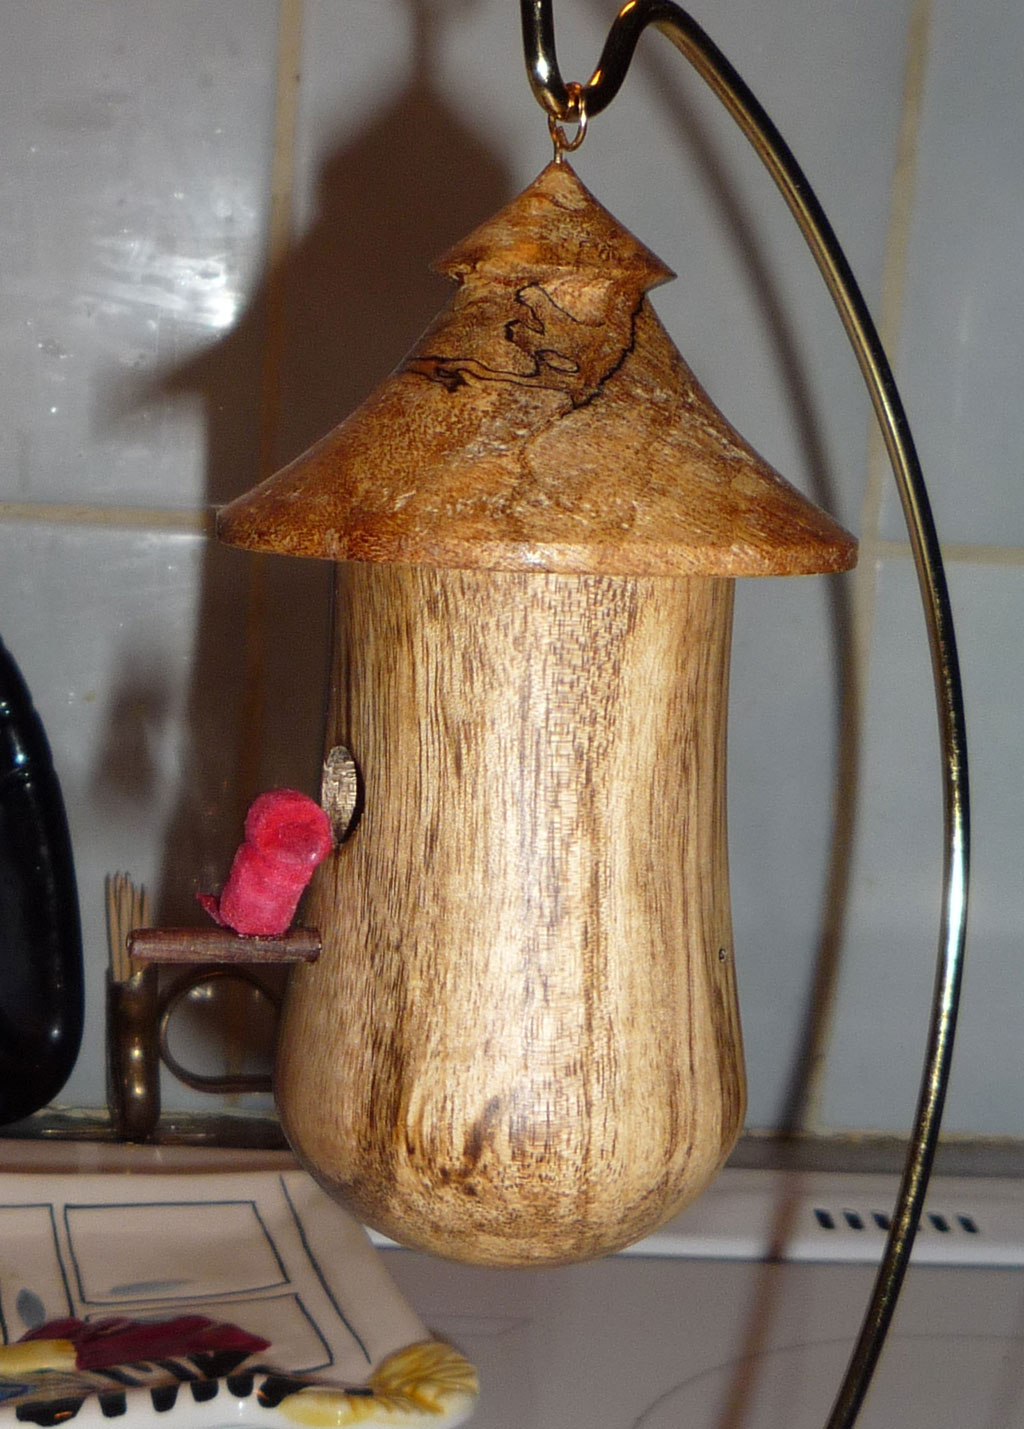 Wood Chips and Firewood: Turned Bird House